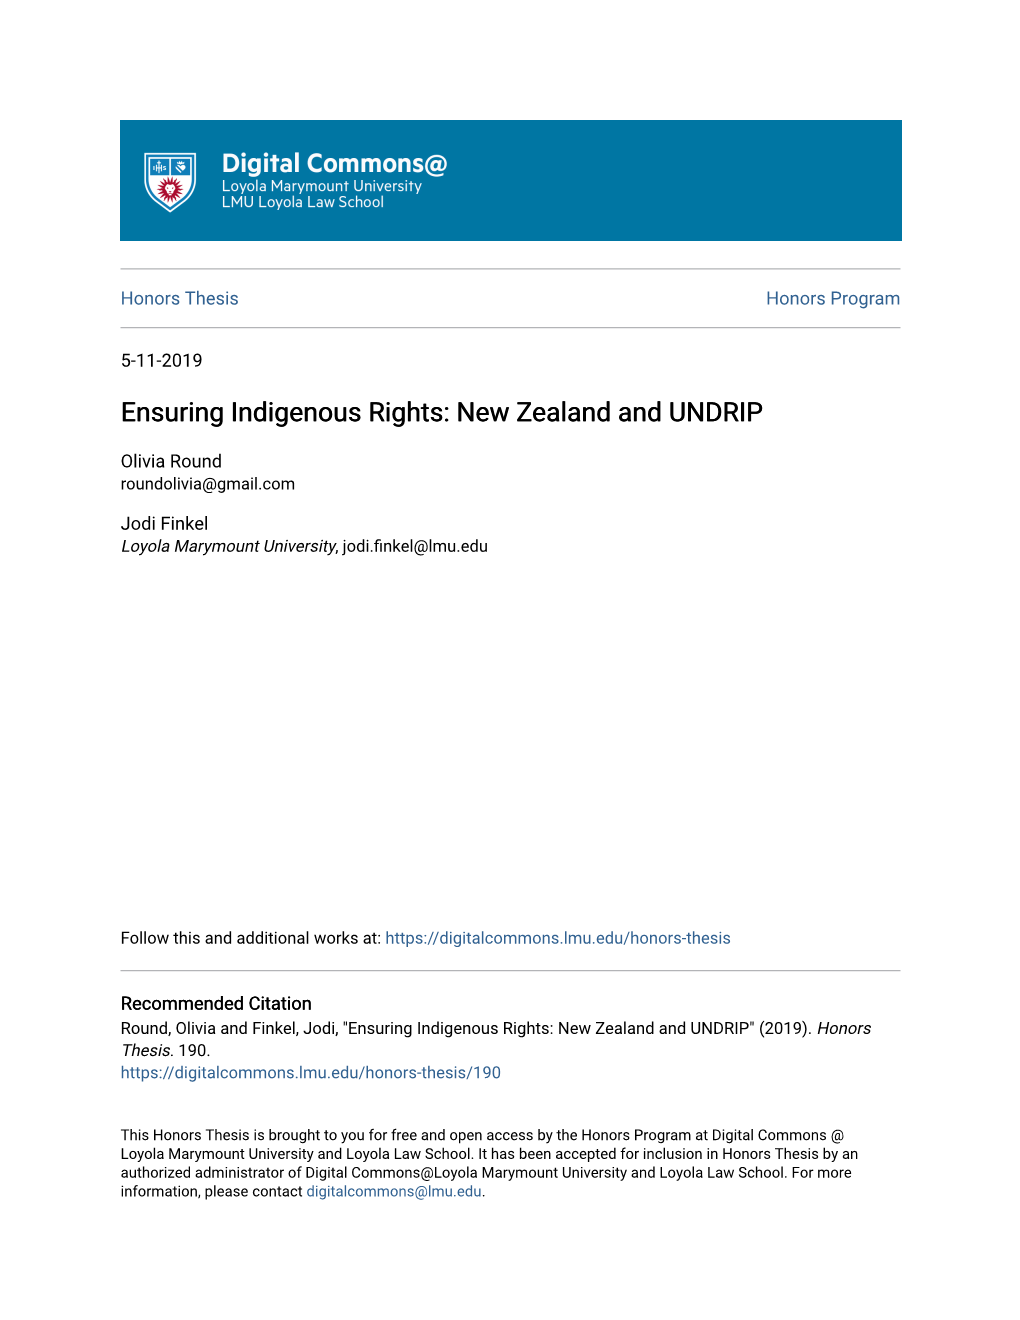 Ensuring Indigenous Rights: New Zealand and UNDRIP